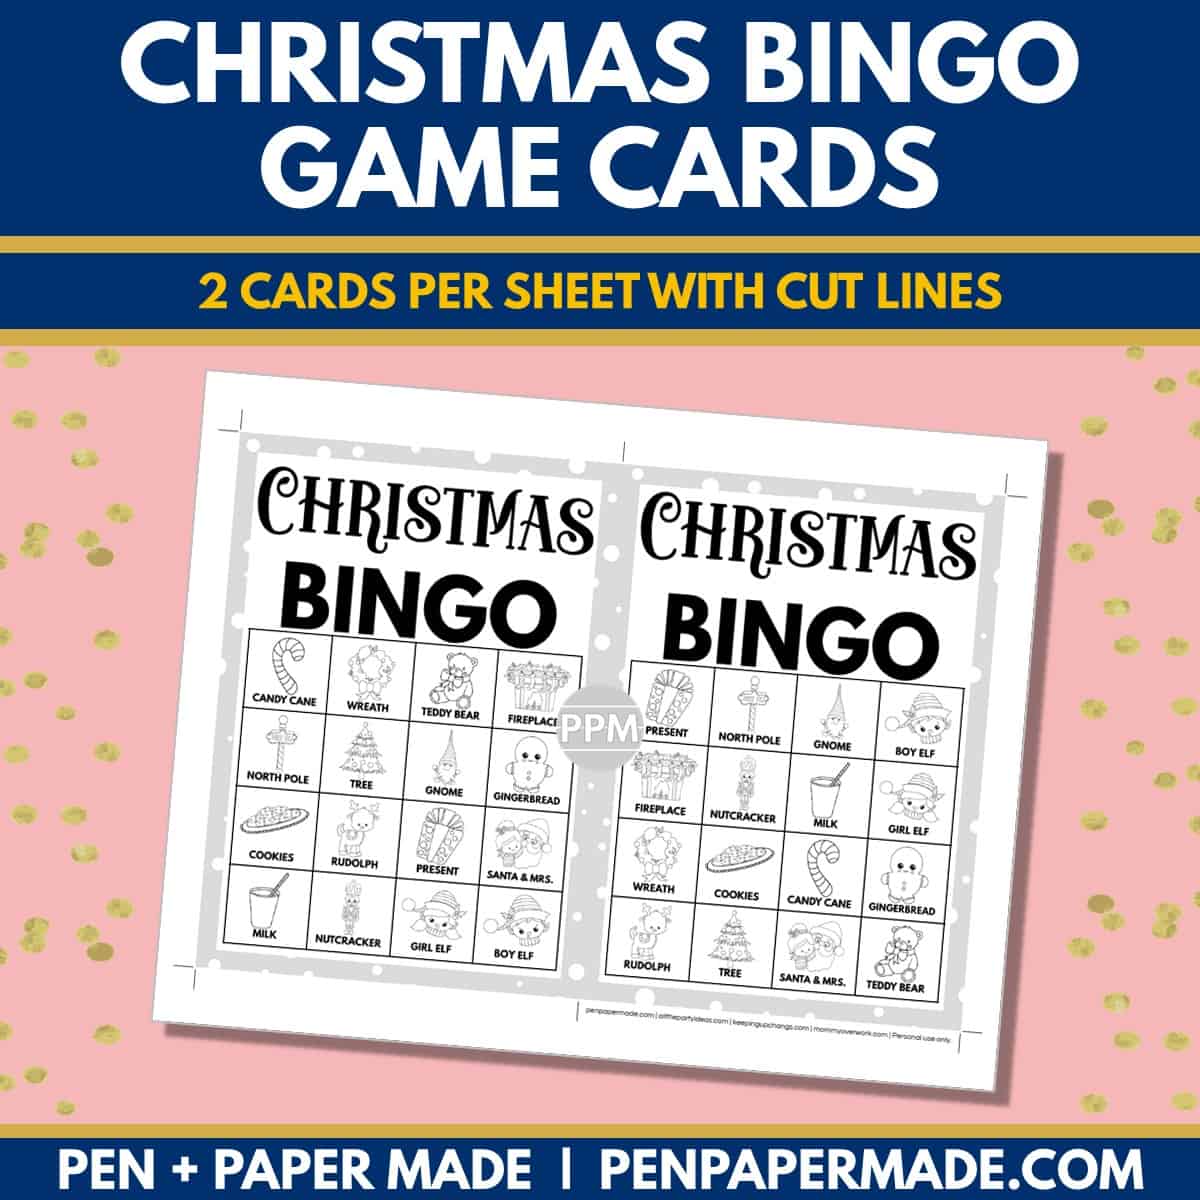 christmas bingo card 4x4 5x7 game boards with images and text words.